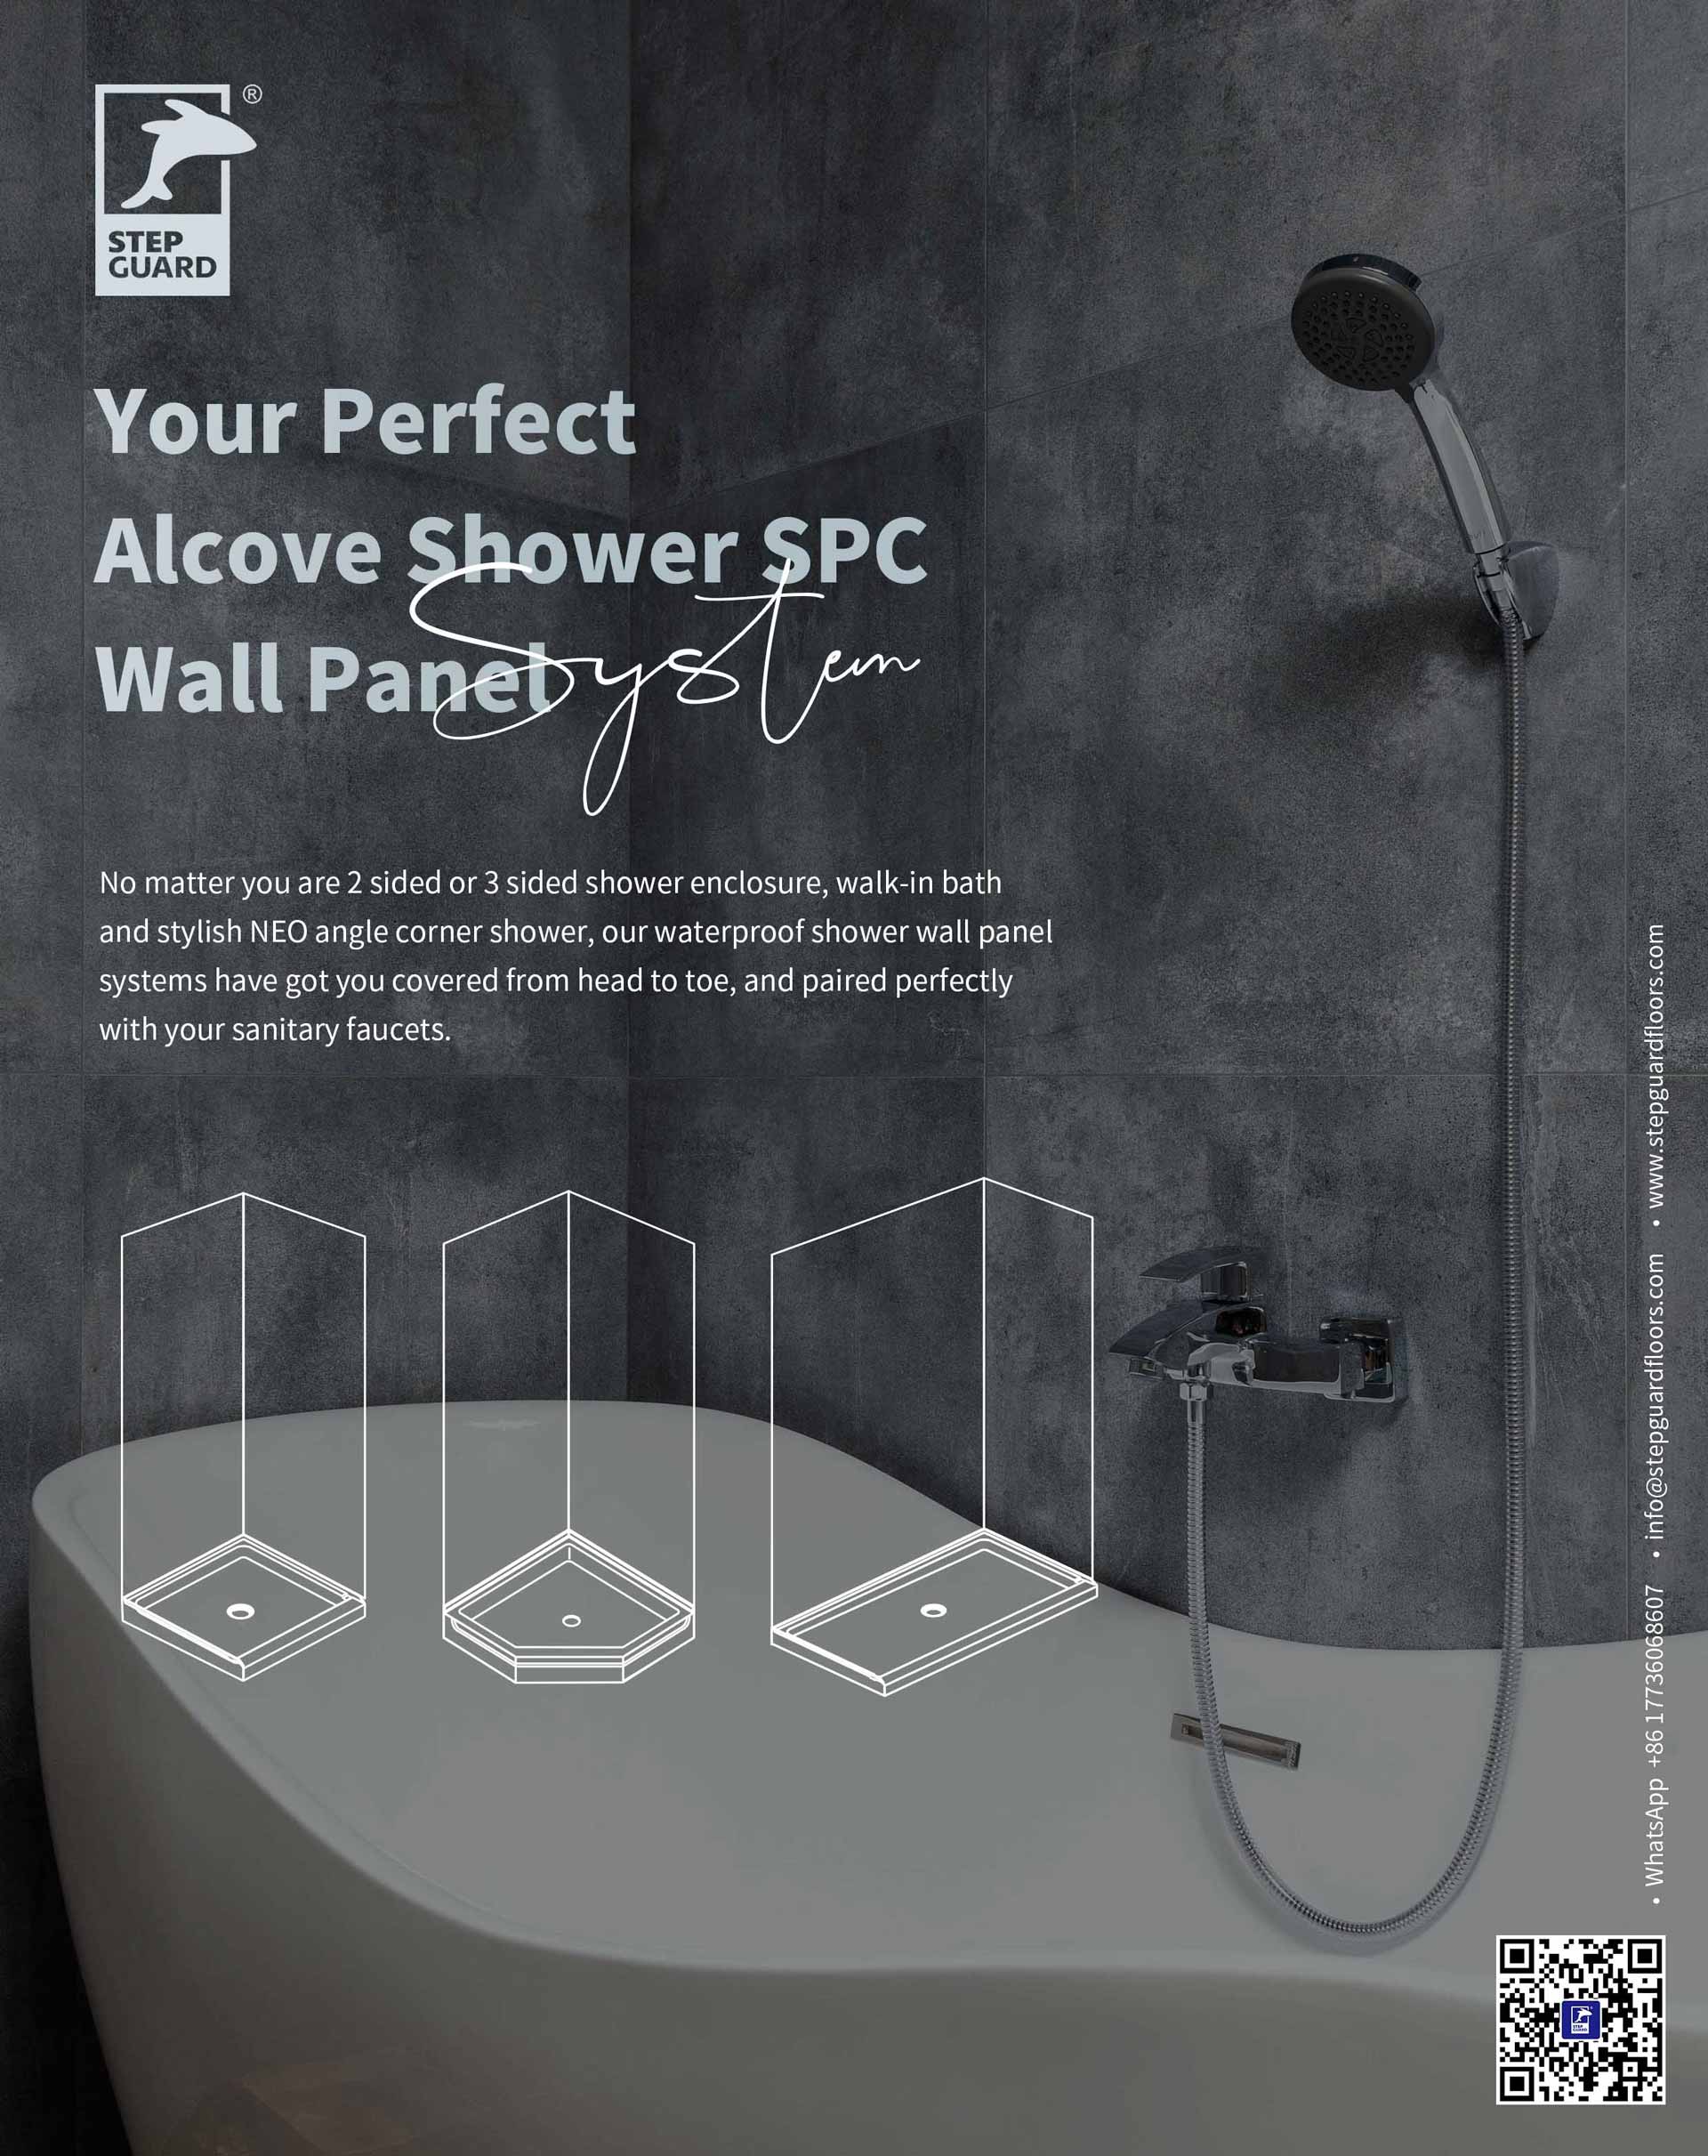 Our SPC wall systems are versatile, ideal for shower spaces, walk-in baths, or stylish NEO angle corner showers.